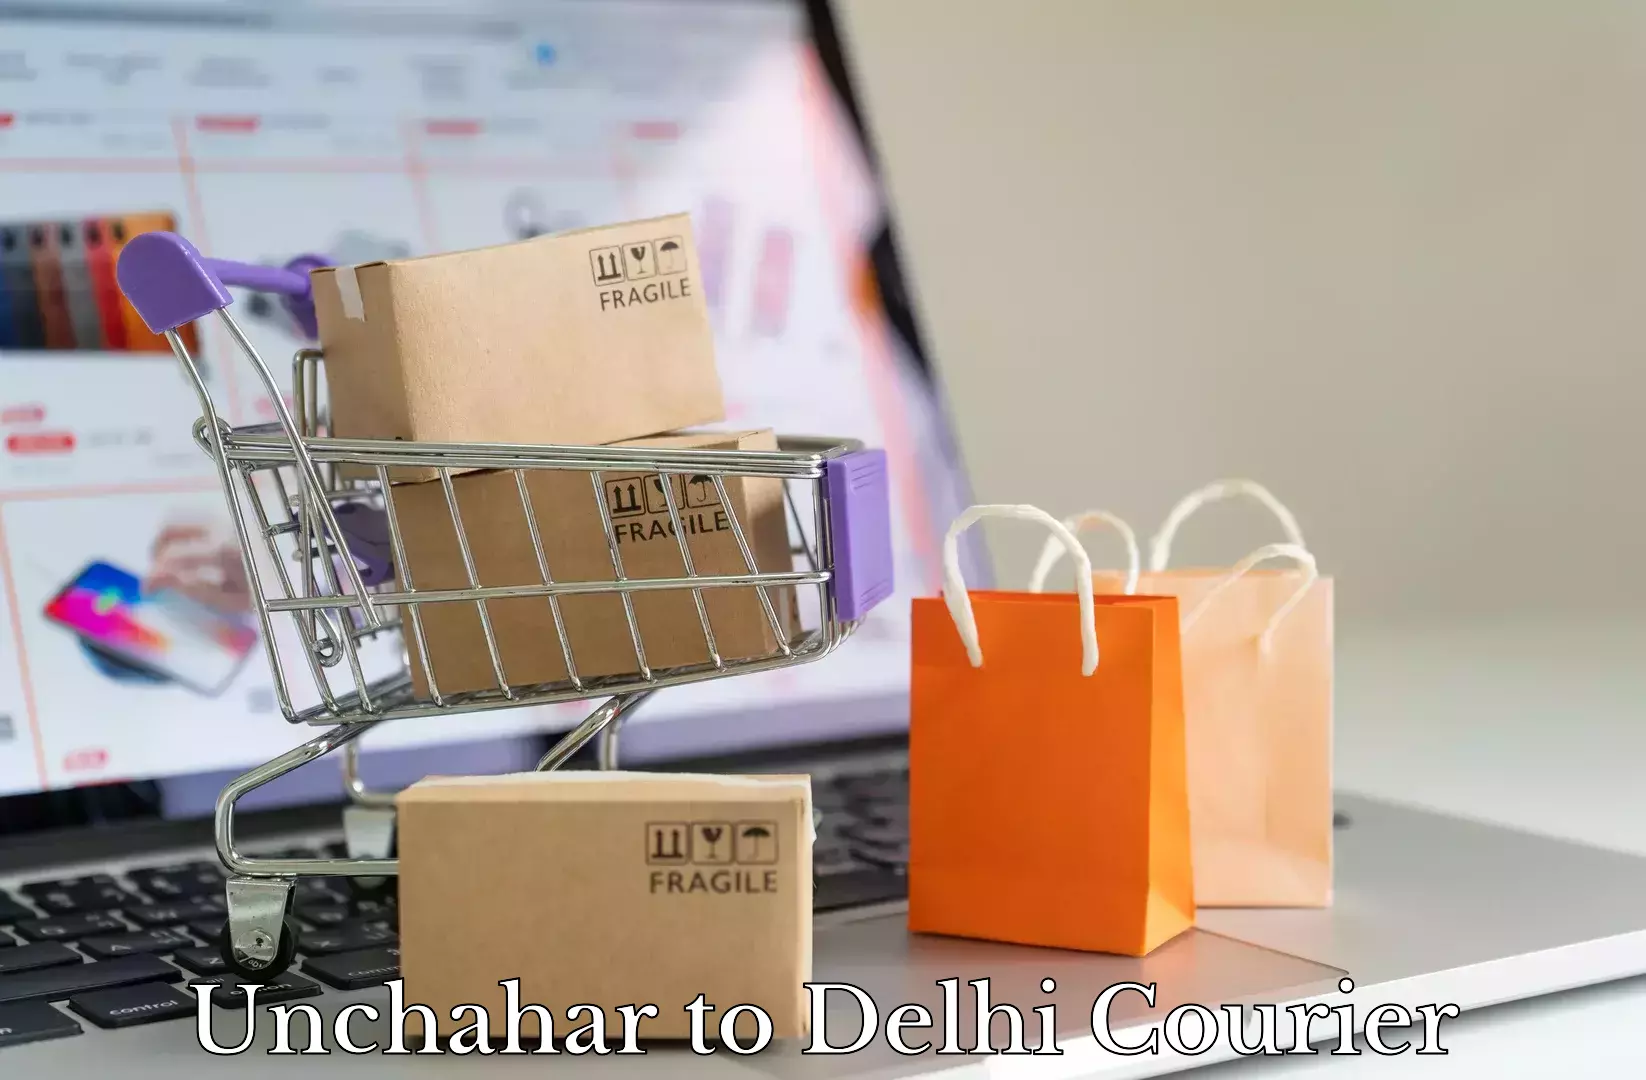 Affordable relocation services in Unchahar to Jawaharlal Nehru University New Delhi